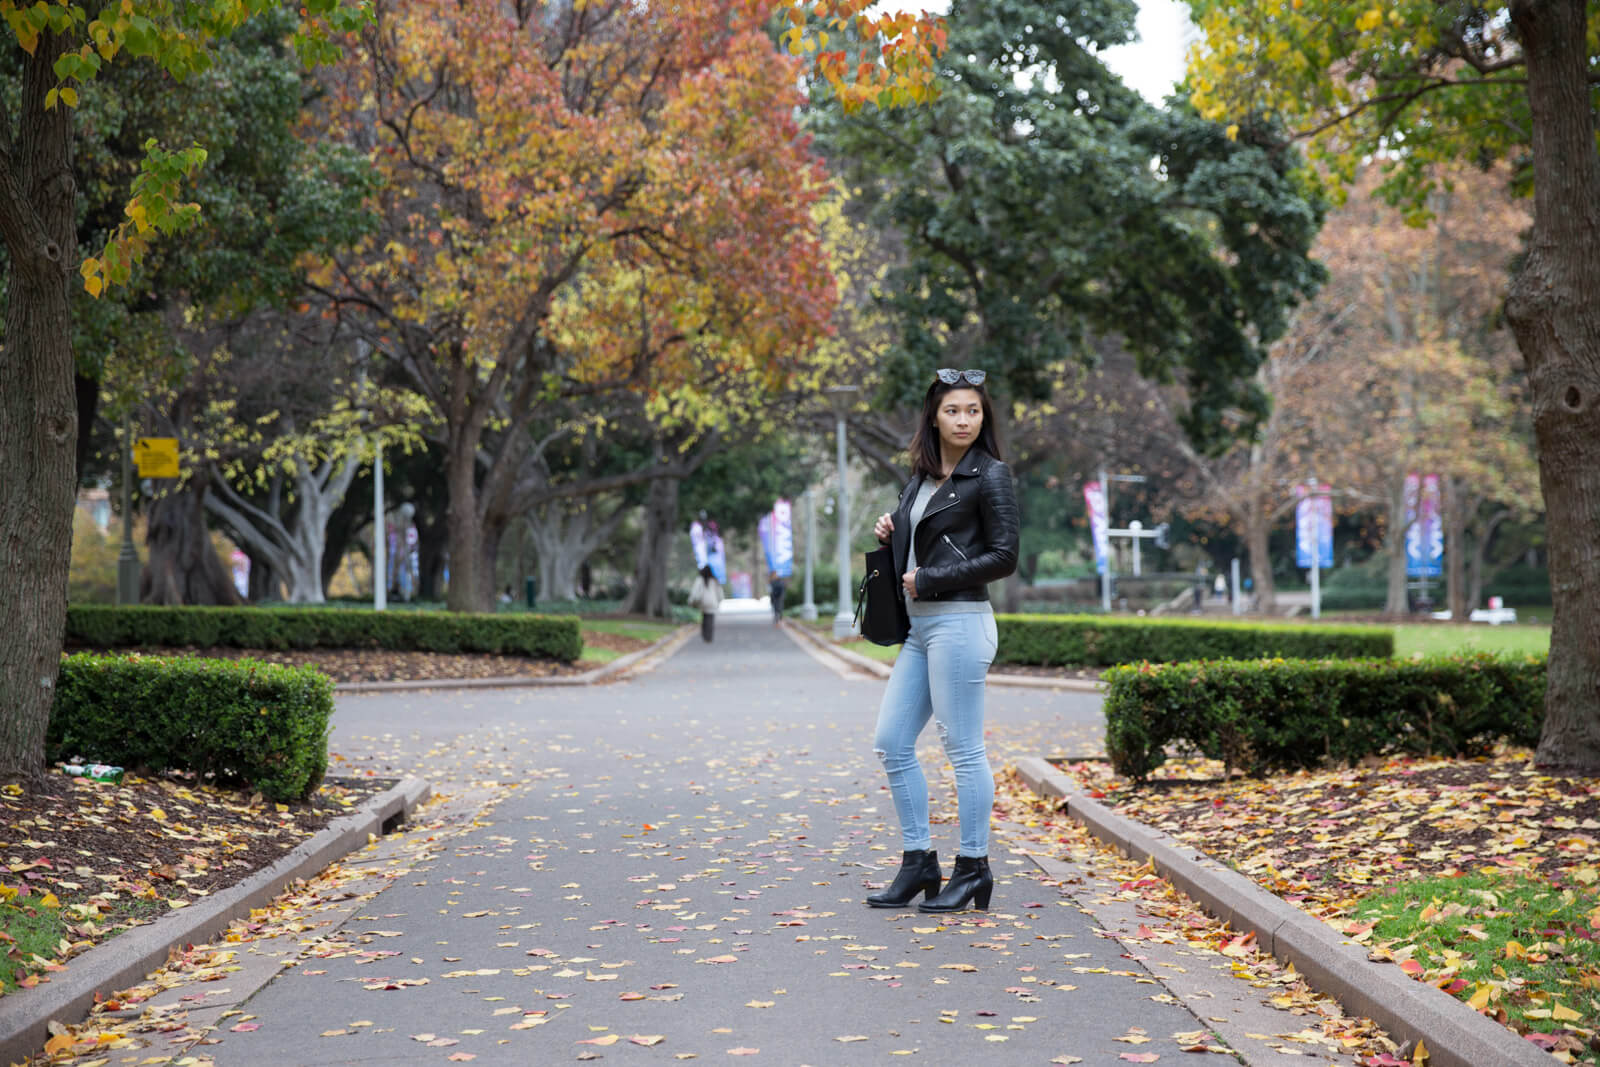 A woman in light blue jeans and a black leather jacket, holding a handbag over her right shoulder. Her left side faces the camera. She is standing on a path surrounded by trees with yellow and green leaves.